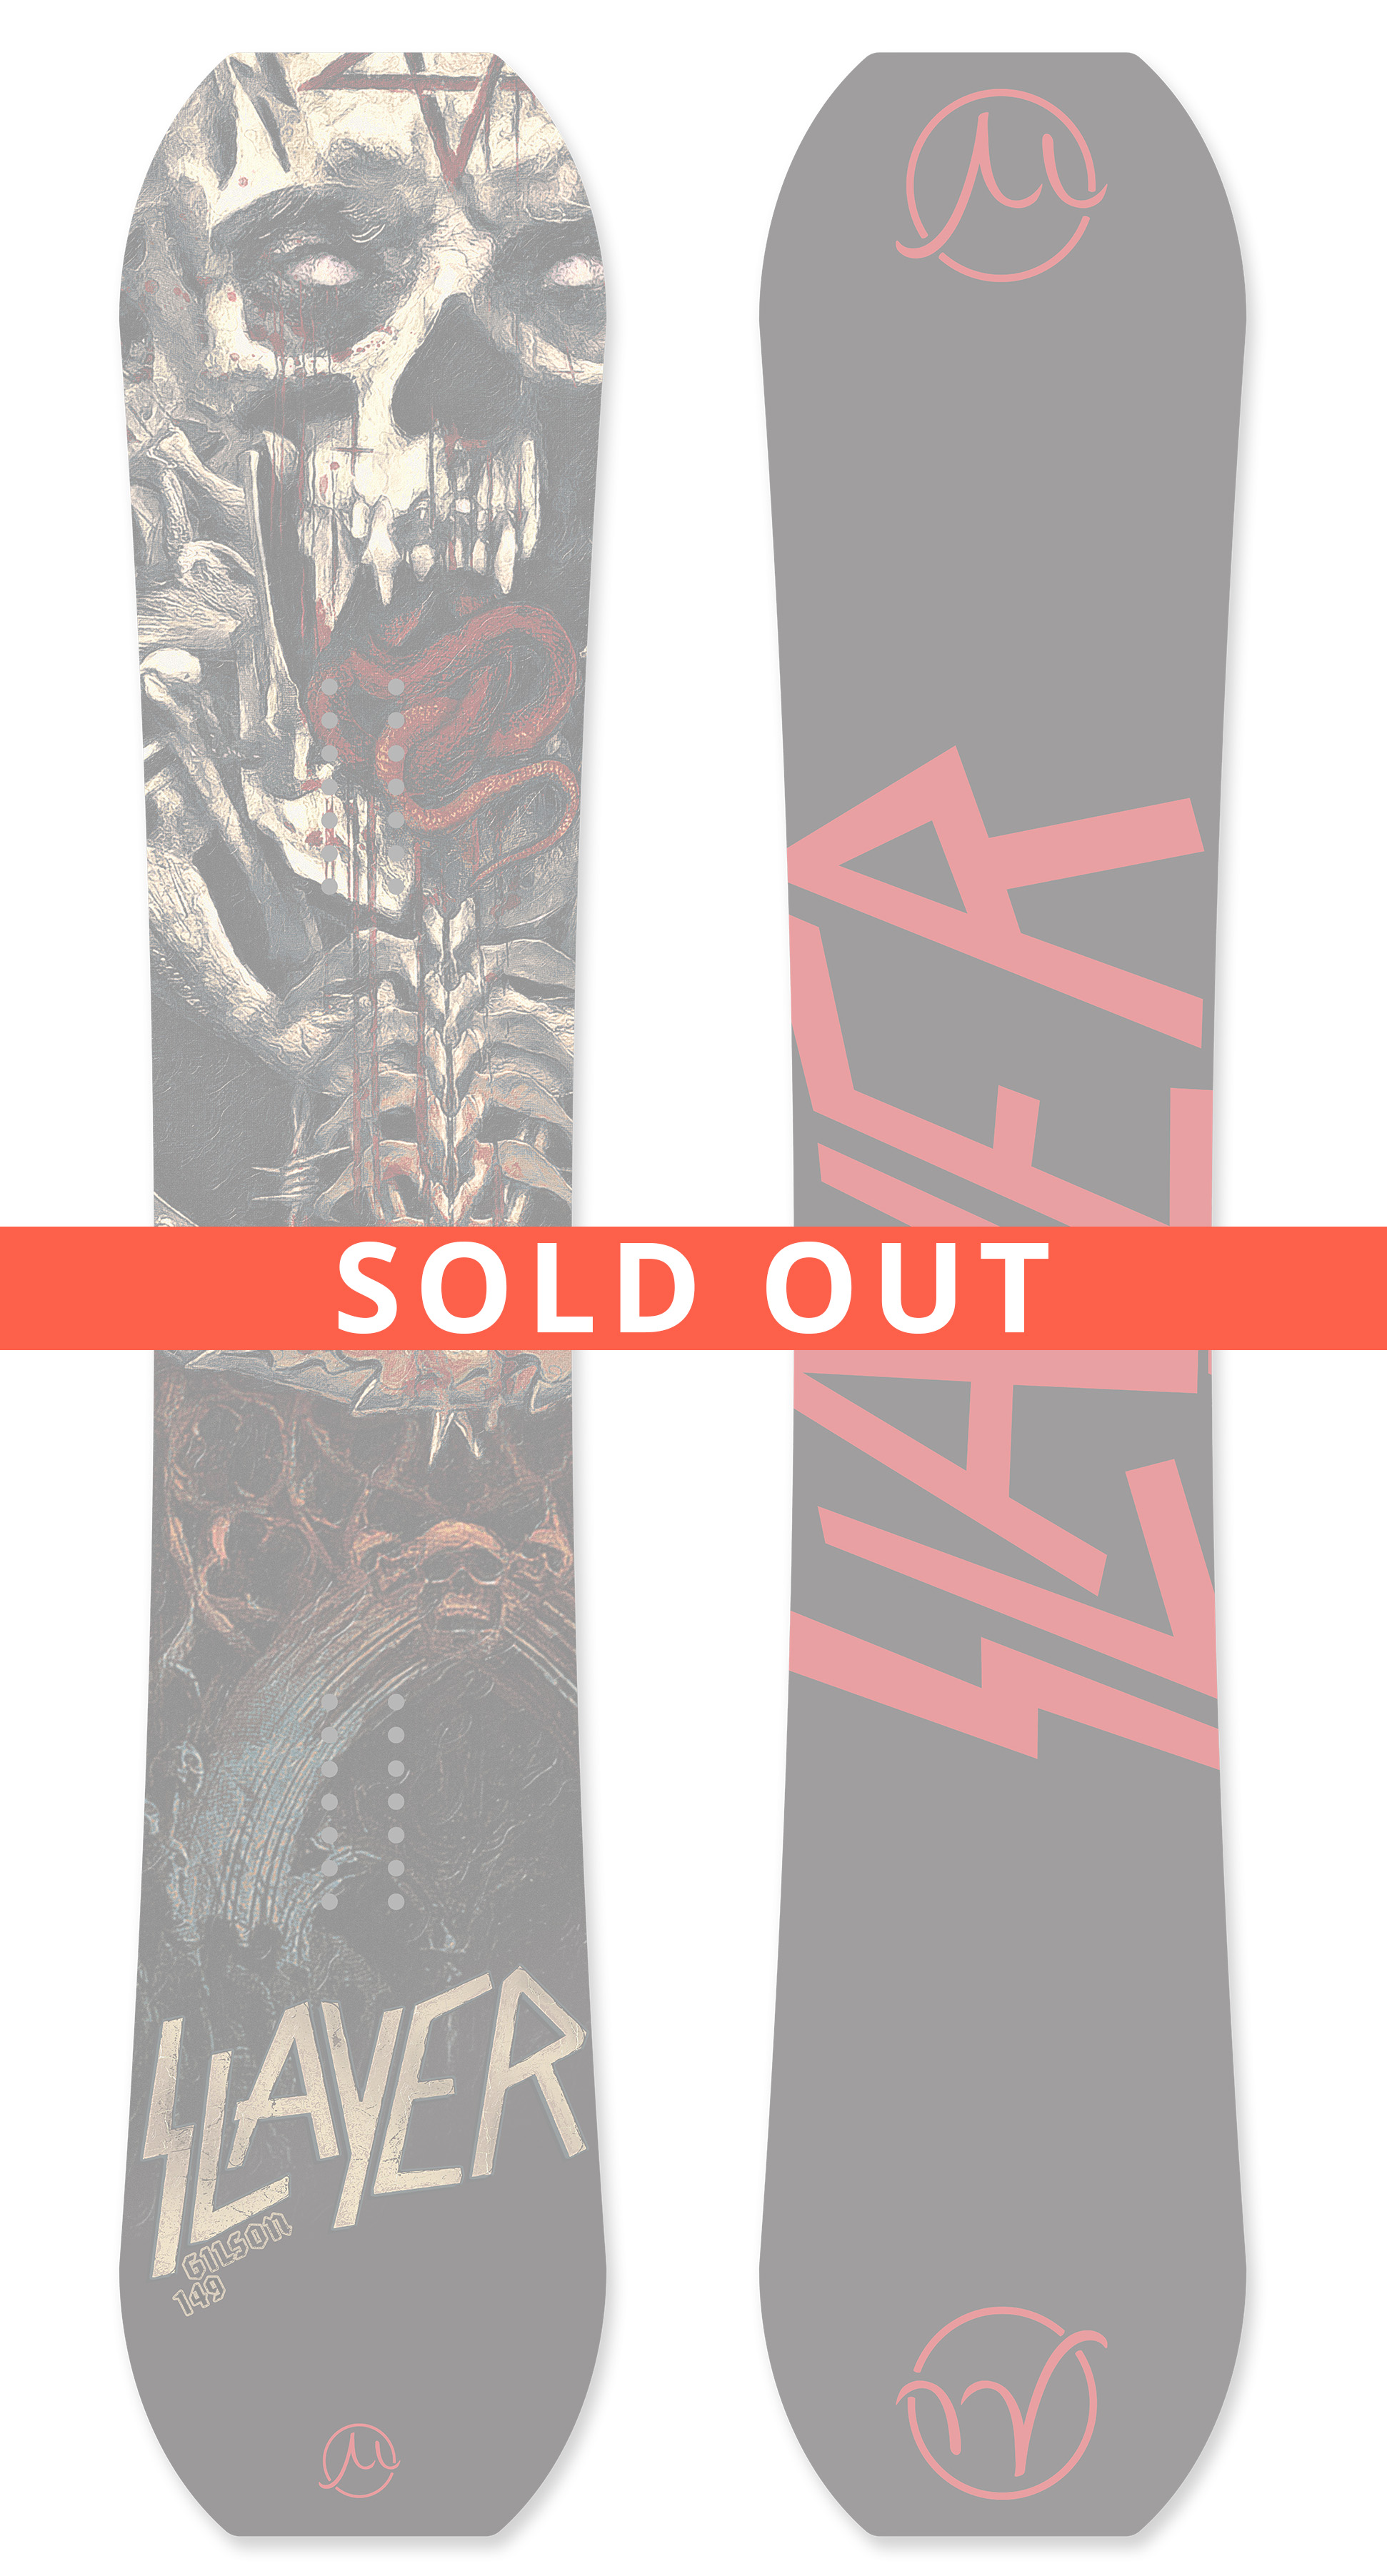 Slayer demonic sold out large